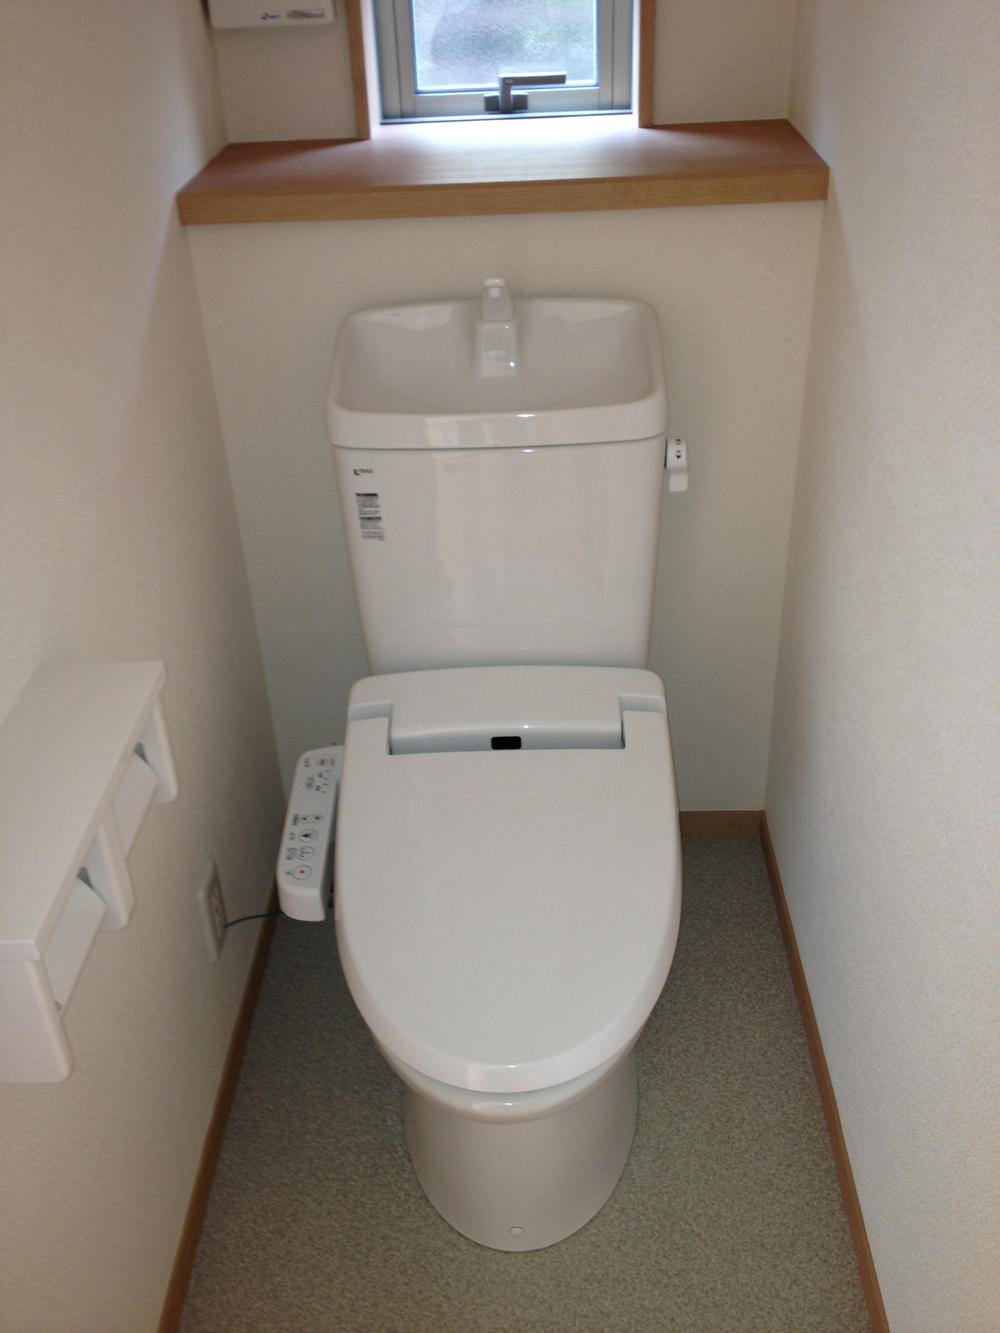 Toilet. It is different from the real thing.